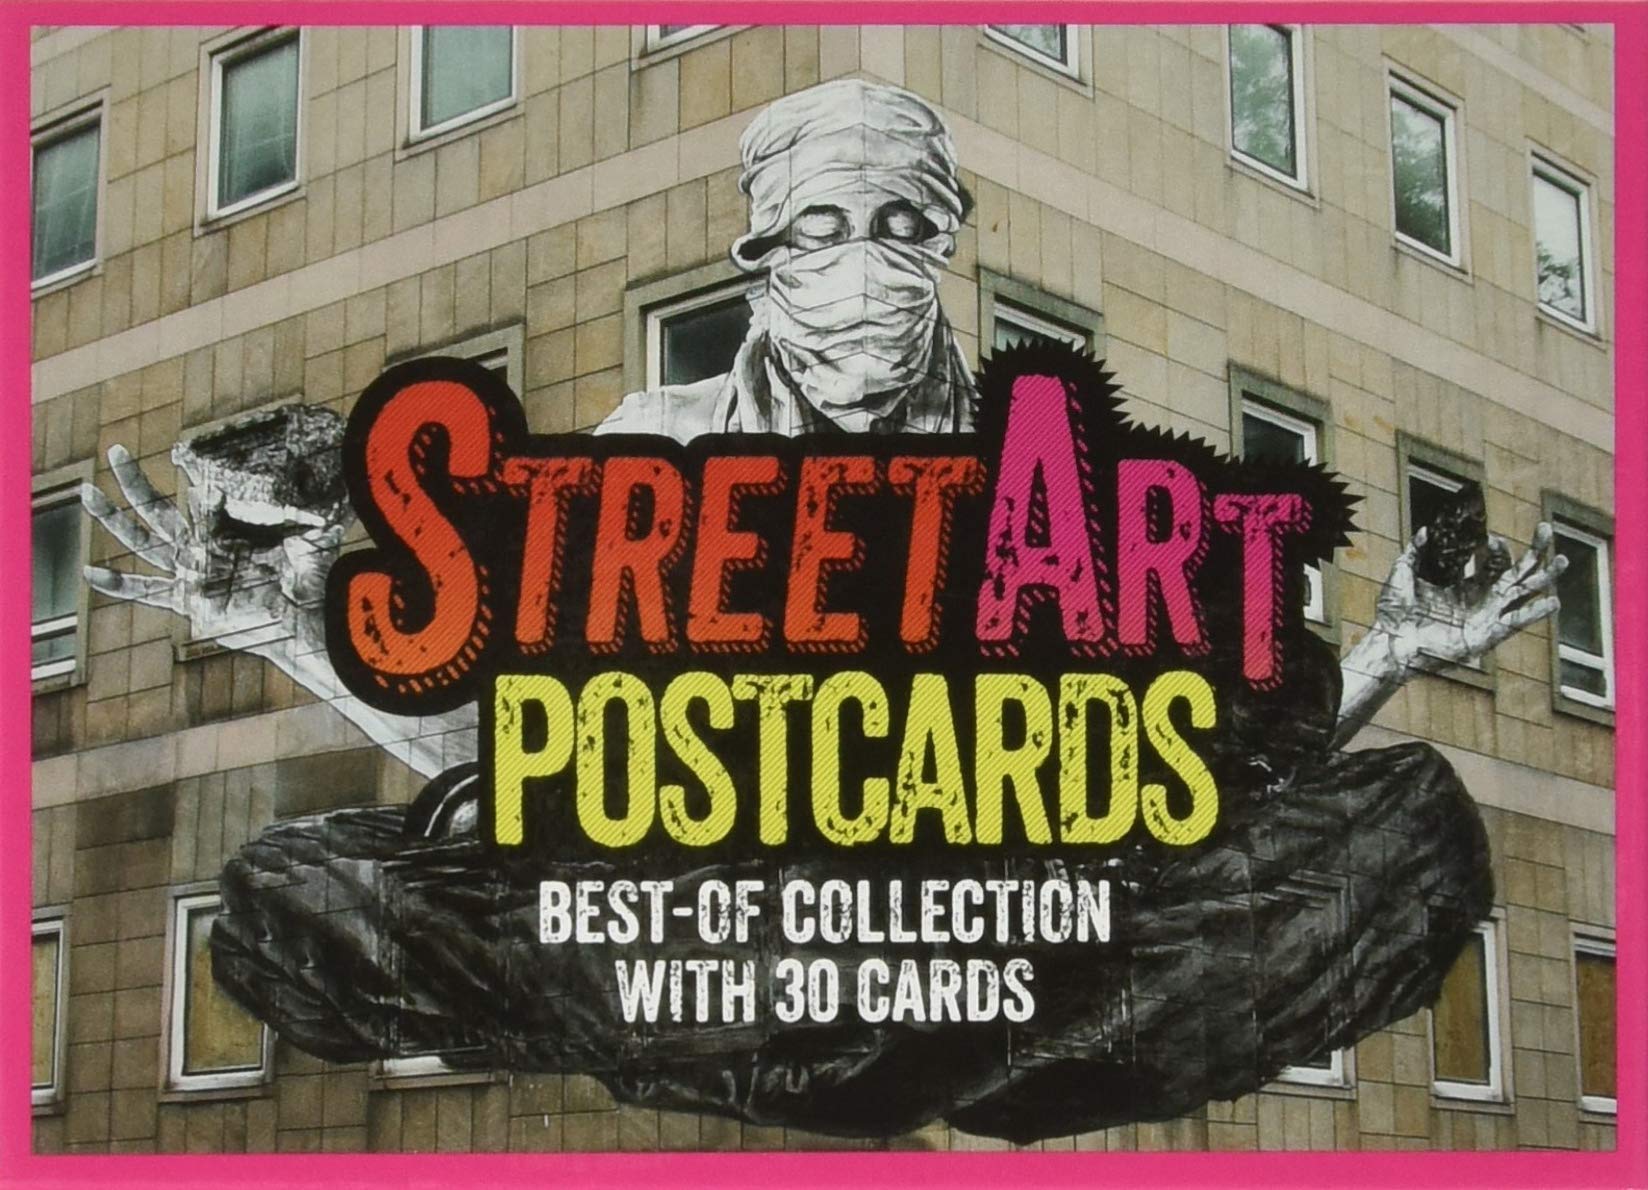 Streetart Postcards: Best of Collection with 30 Cards